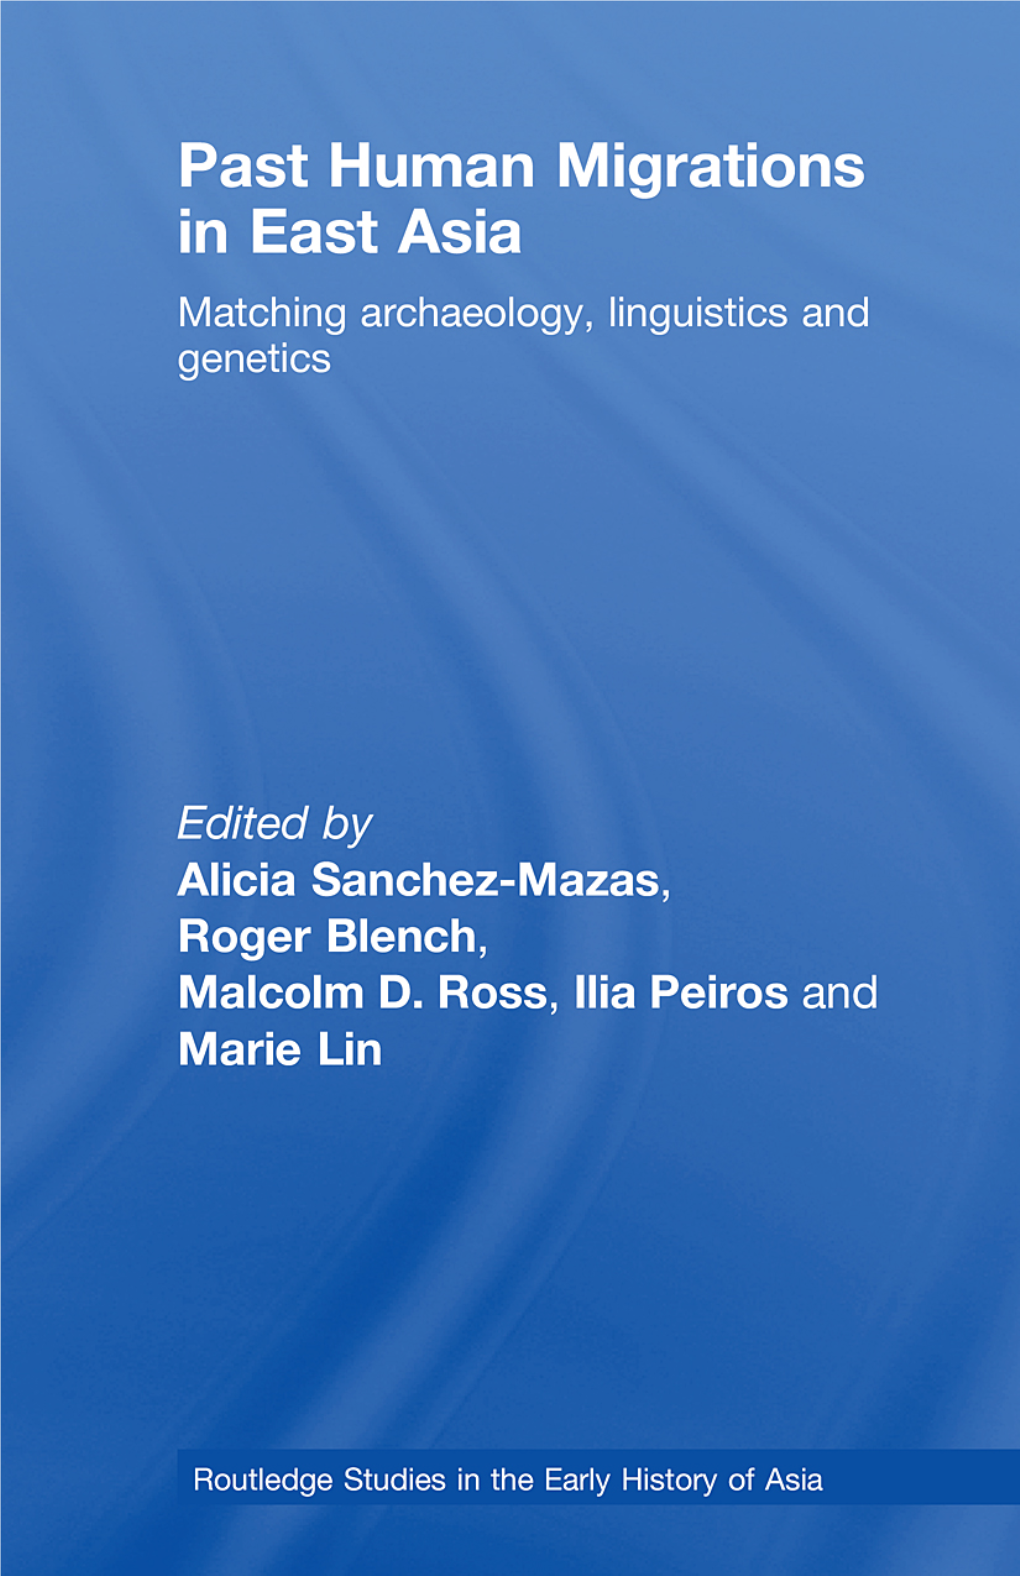 Past Human Migrations in East Asia: Matching Archaeology, Linguistics